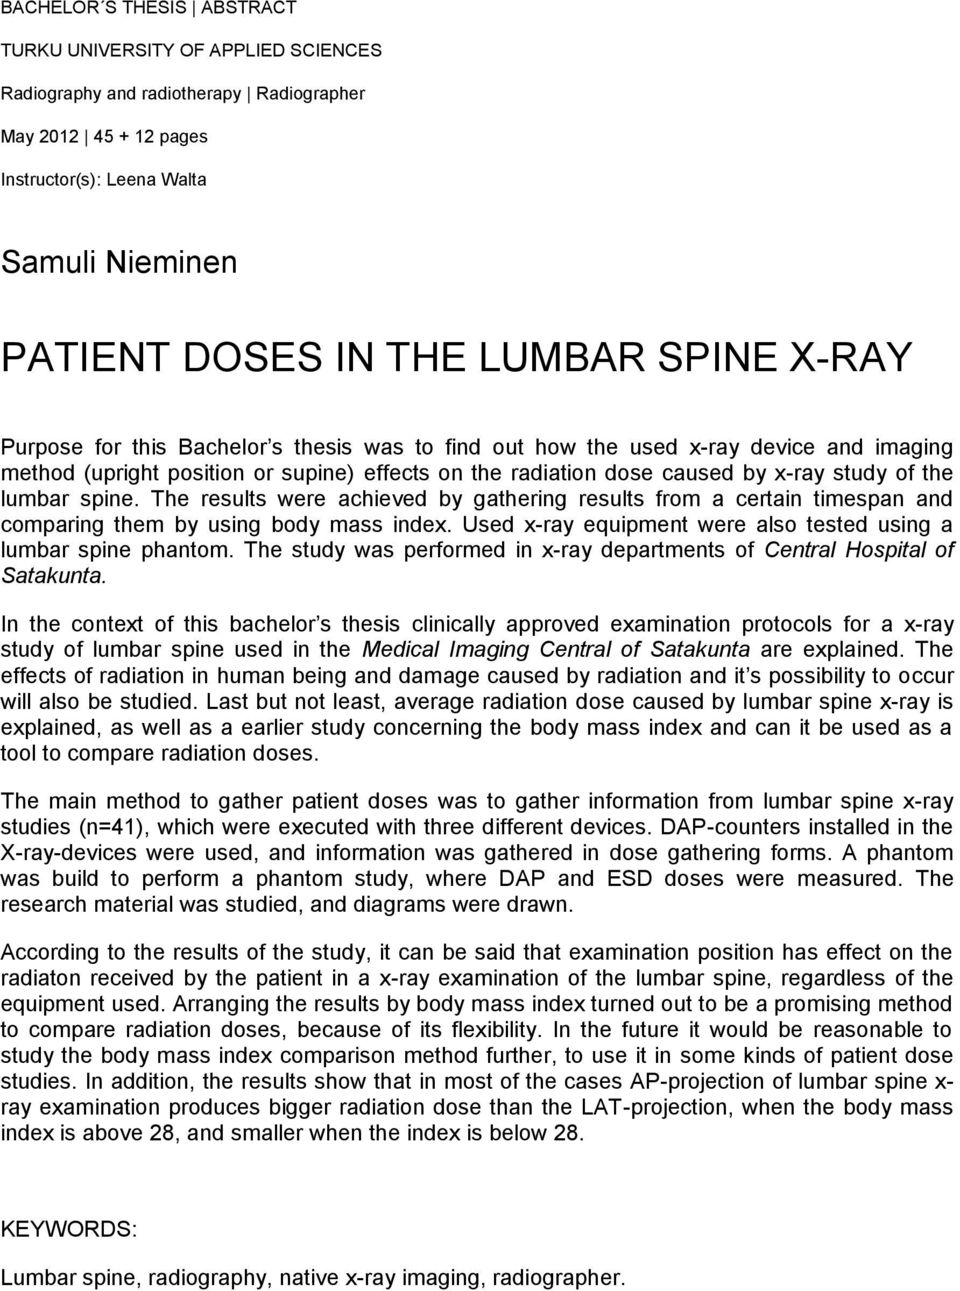 lumbar spine. The results were achieved by gathering results from a certain timespan and comparing them by using body mass index. Used x-ray equipment were also tested using a lumbar spine phantom.